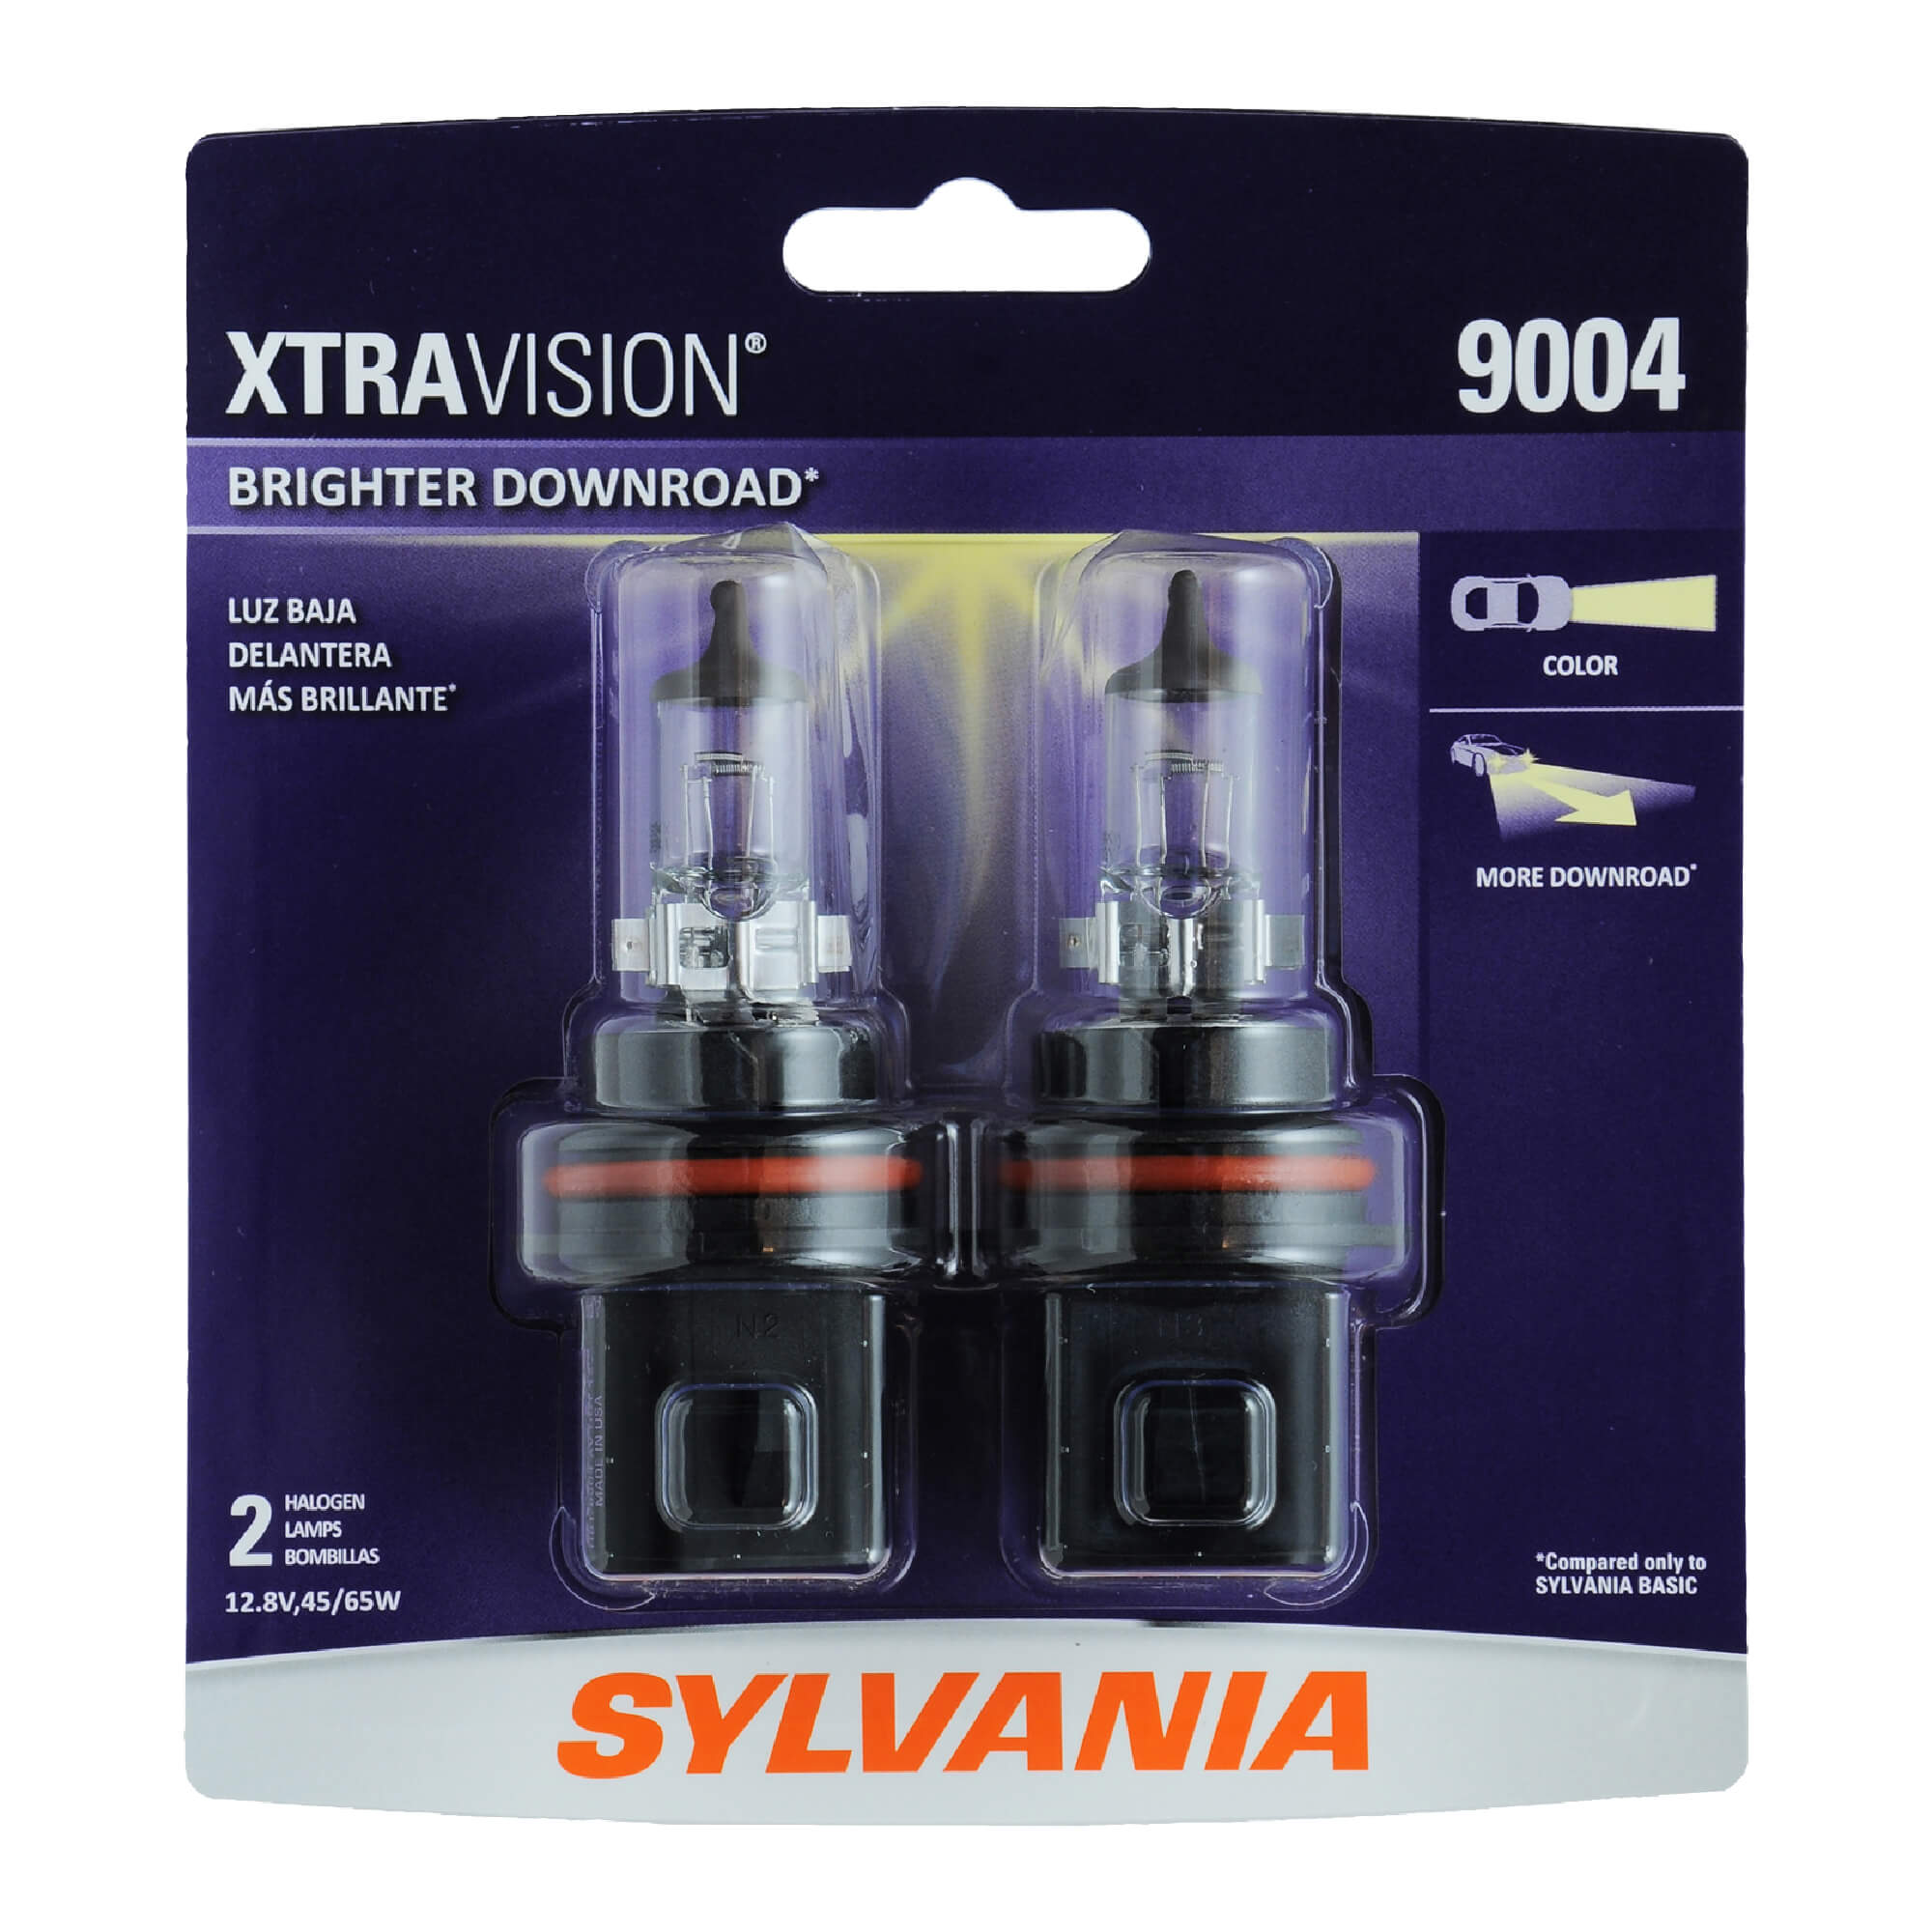 High Performance Halogen Headlight Bulb 9004 XtraVision Contains 2 Bulbs SYLVANIA High Beam Low Beam and Fog Replacement Bulb 